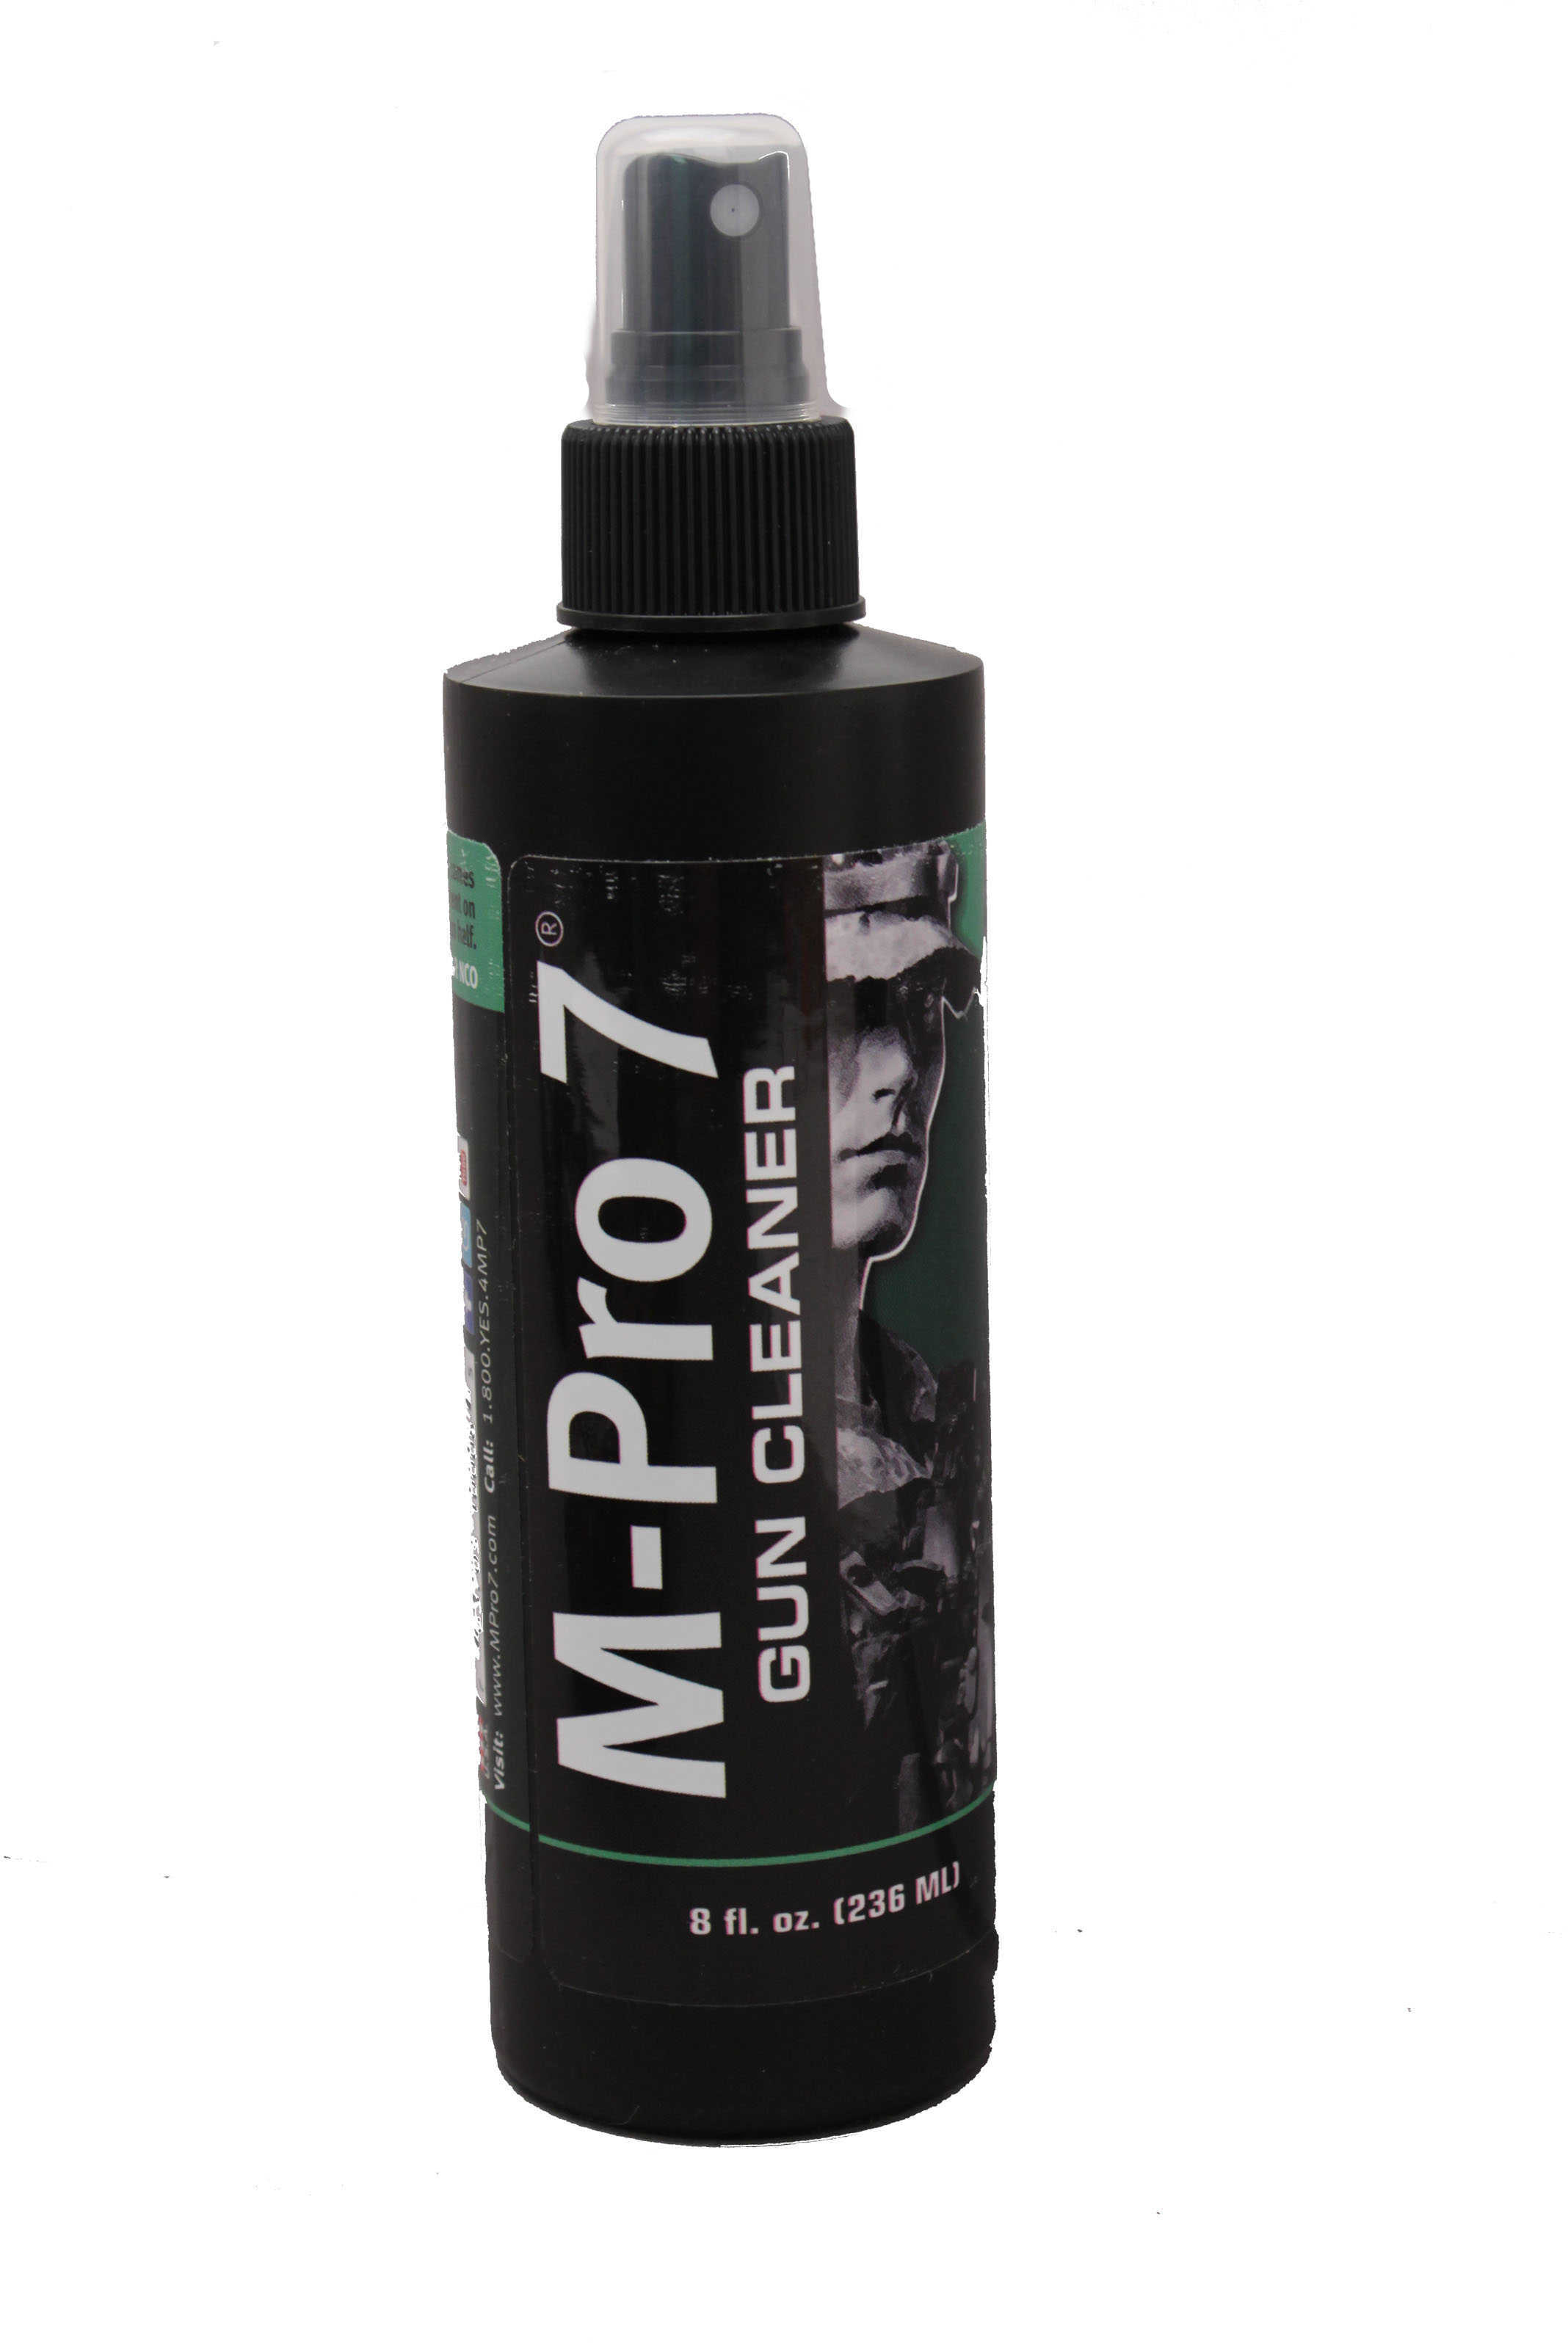 Hoppes M-Pro 7 Gun Cleaner 8 Oz. - Formulated Military-Style Cleaning Developed Originally To Maintain Weapons On